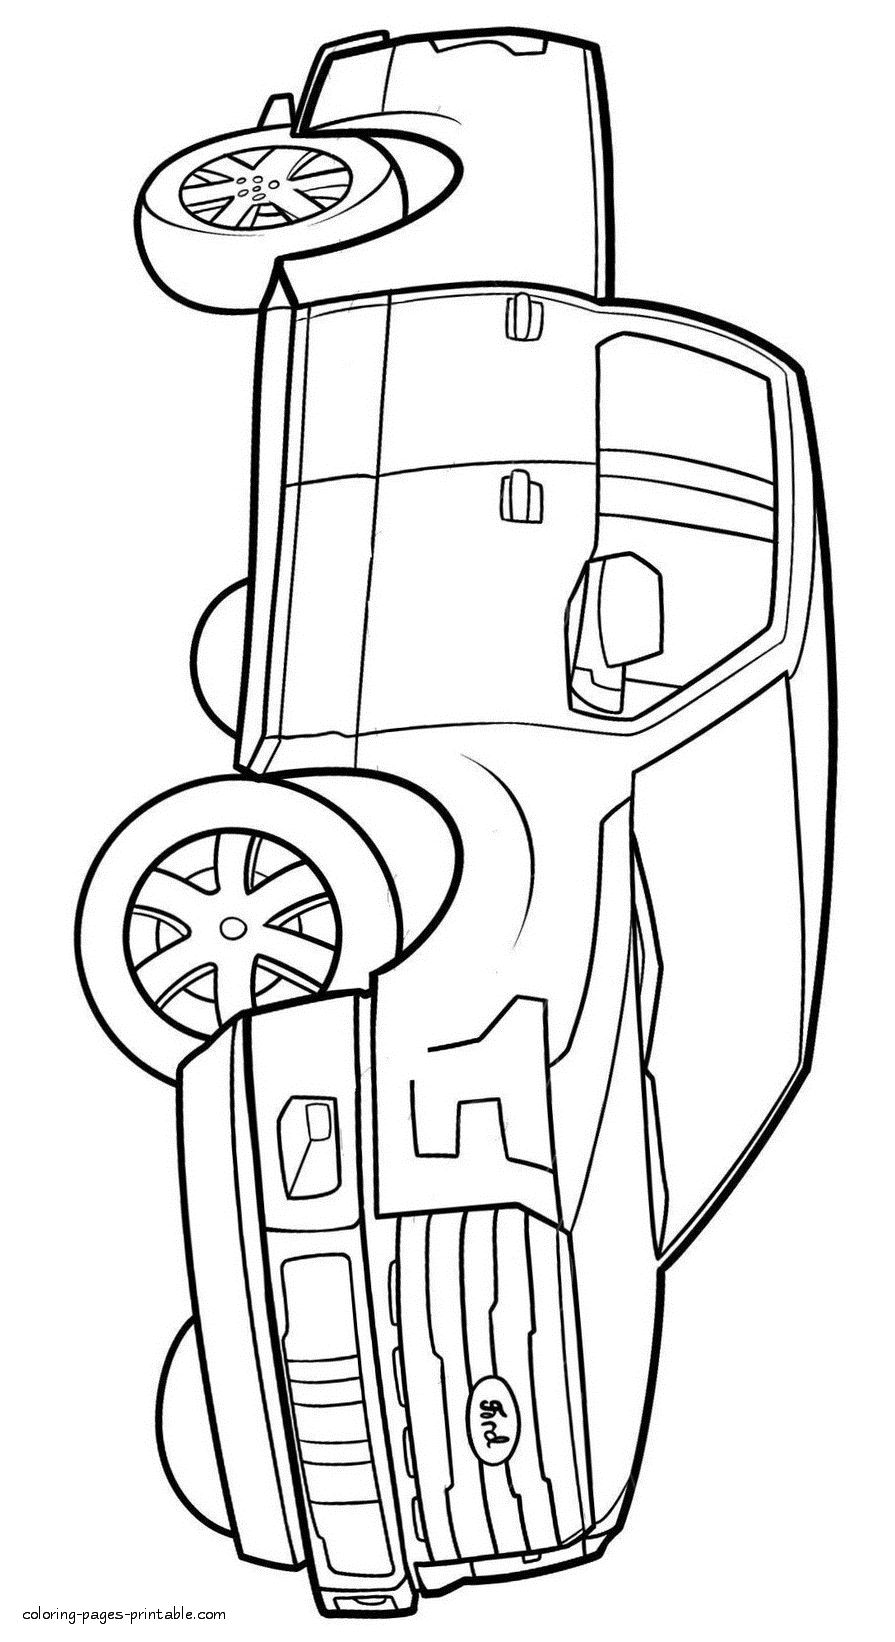 Print free this pickup truck coloring page for your kid